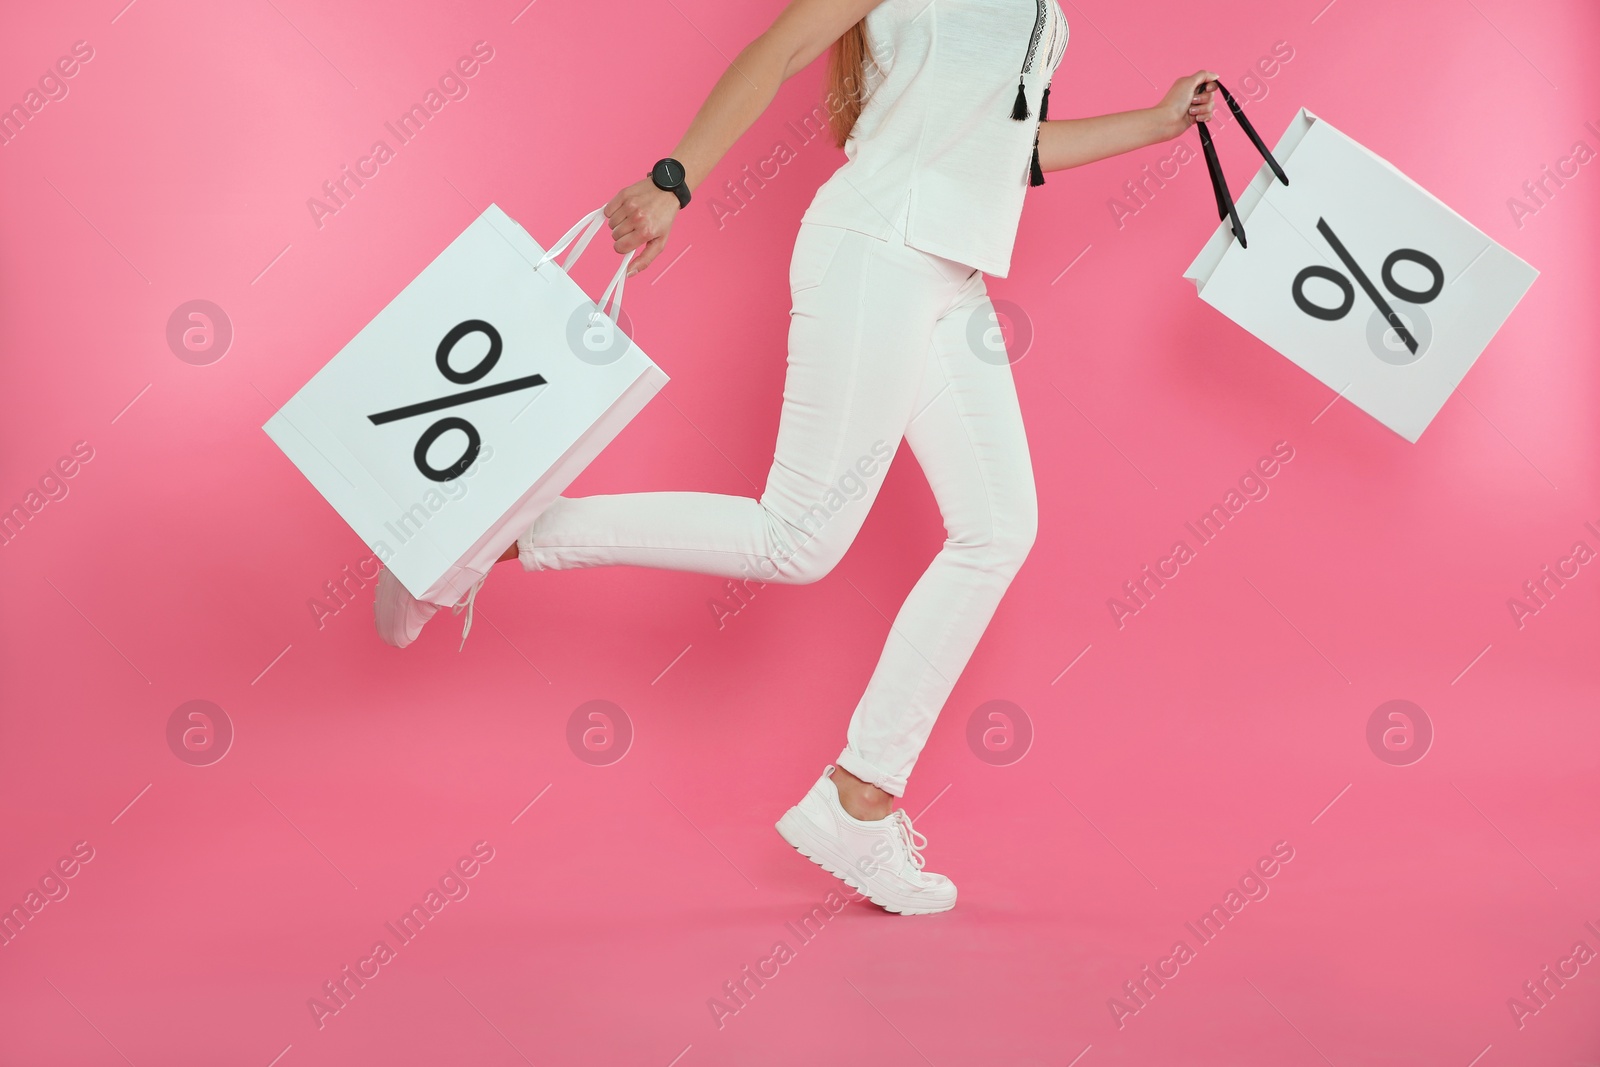 Image of Discount, sale, offer. Woman running with shopping bags against pink background, closeup. Paper bags with percent signs